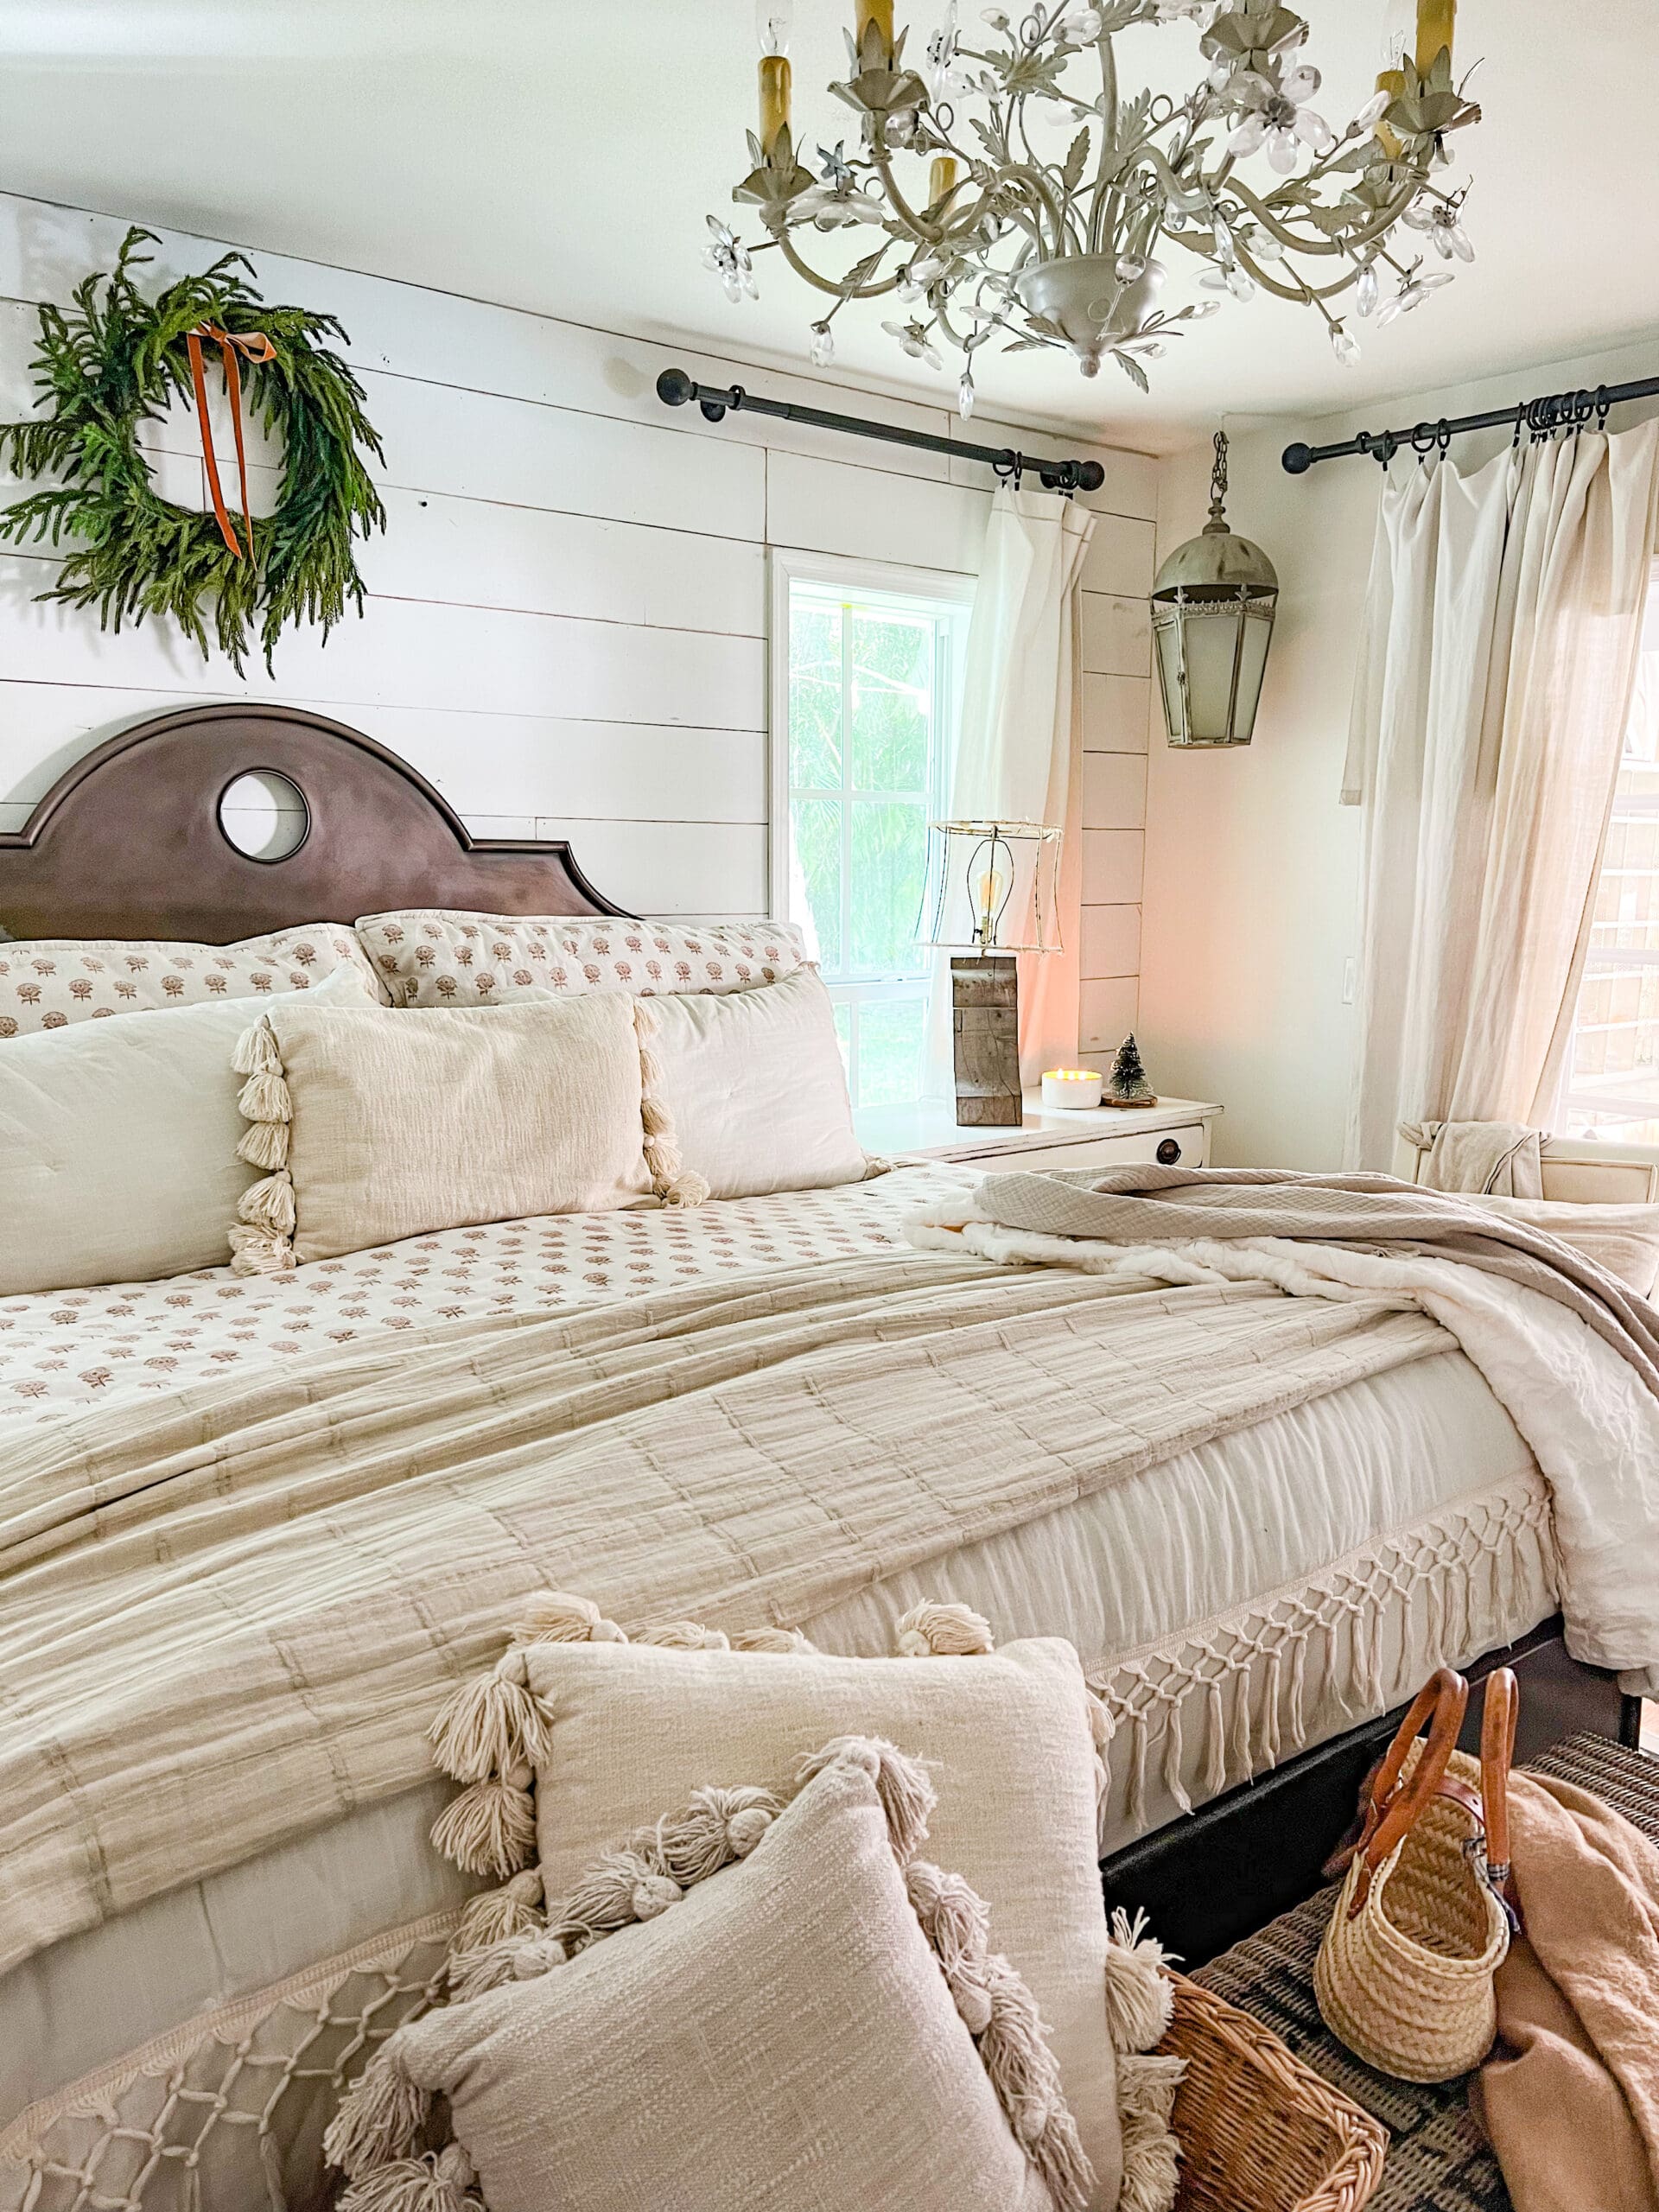 10 Ways to Decorate a Cozy Winter Bedroom Retreat On a Budget